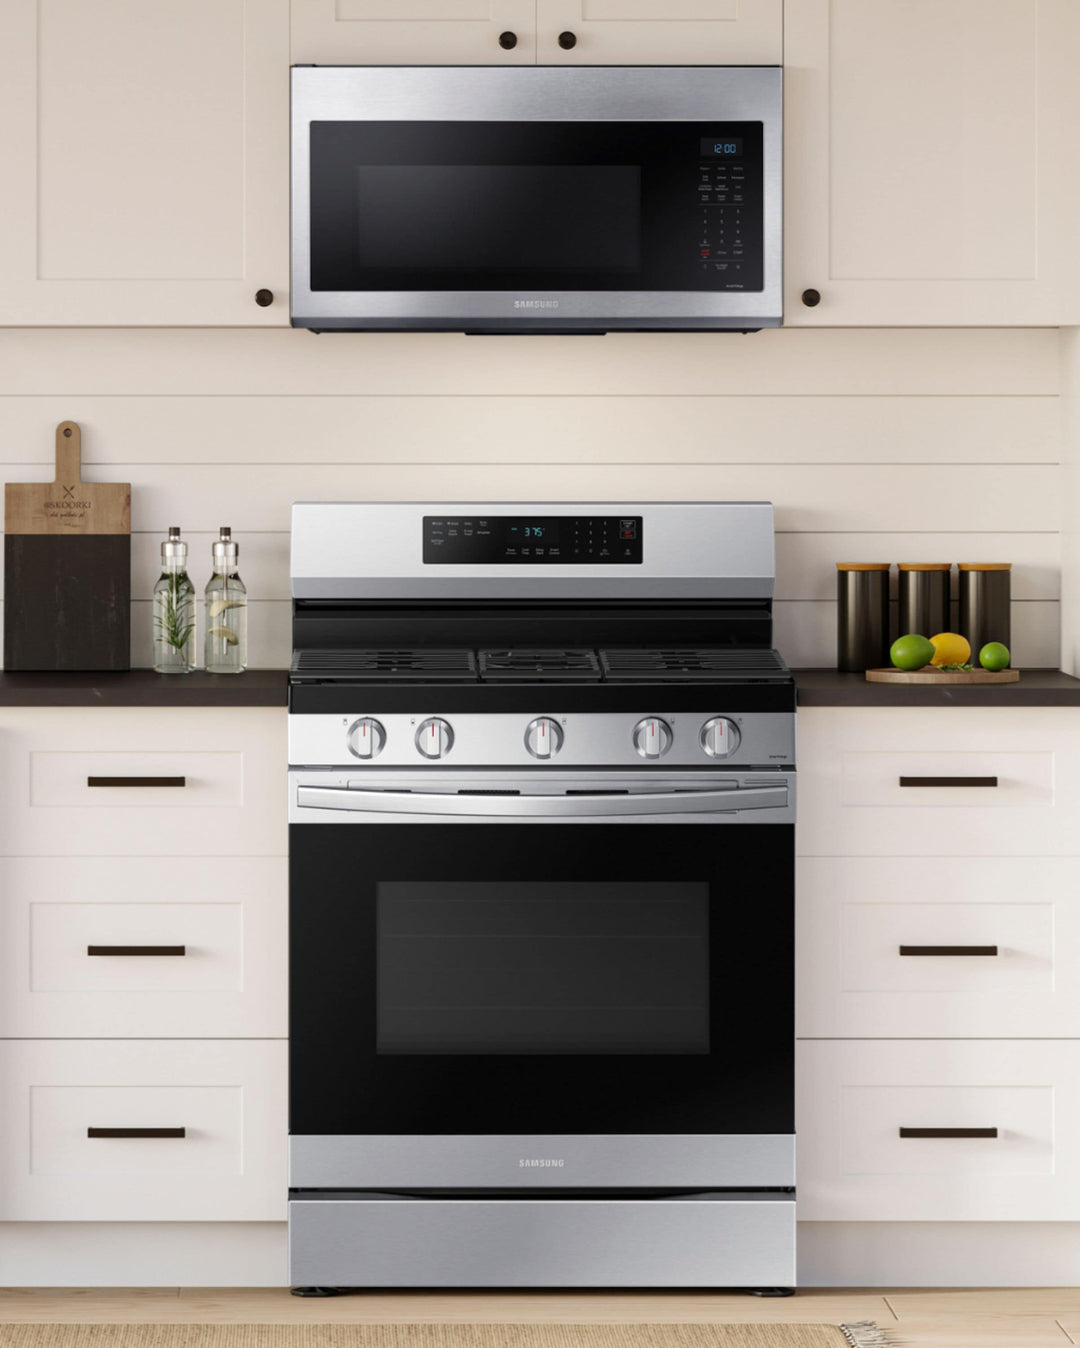 Samsung - 6.0 cu. ft. Freestanding Gas Range with WiFi, No-Preheat Air Fry & Convection - Stainless steel_8